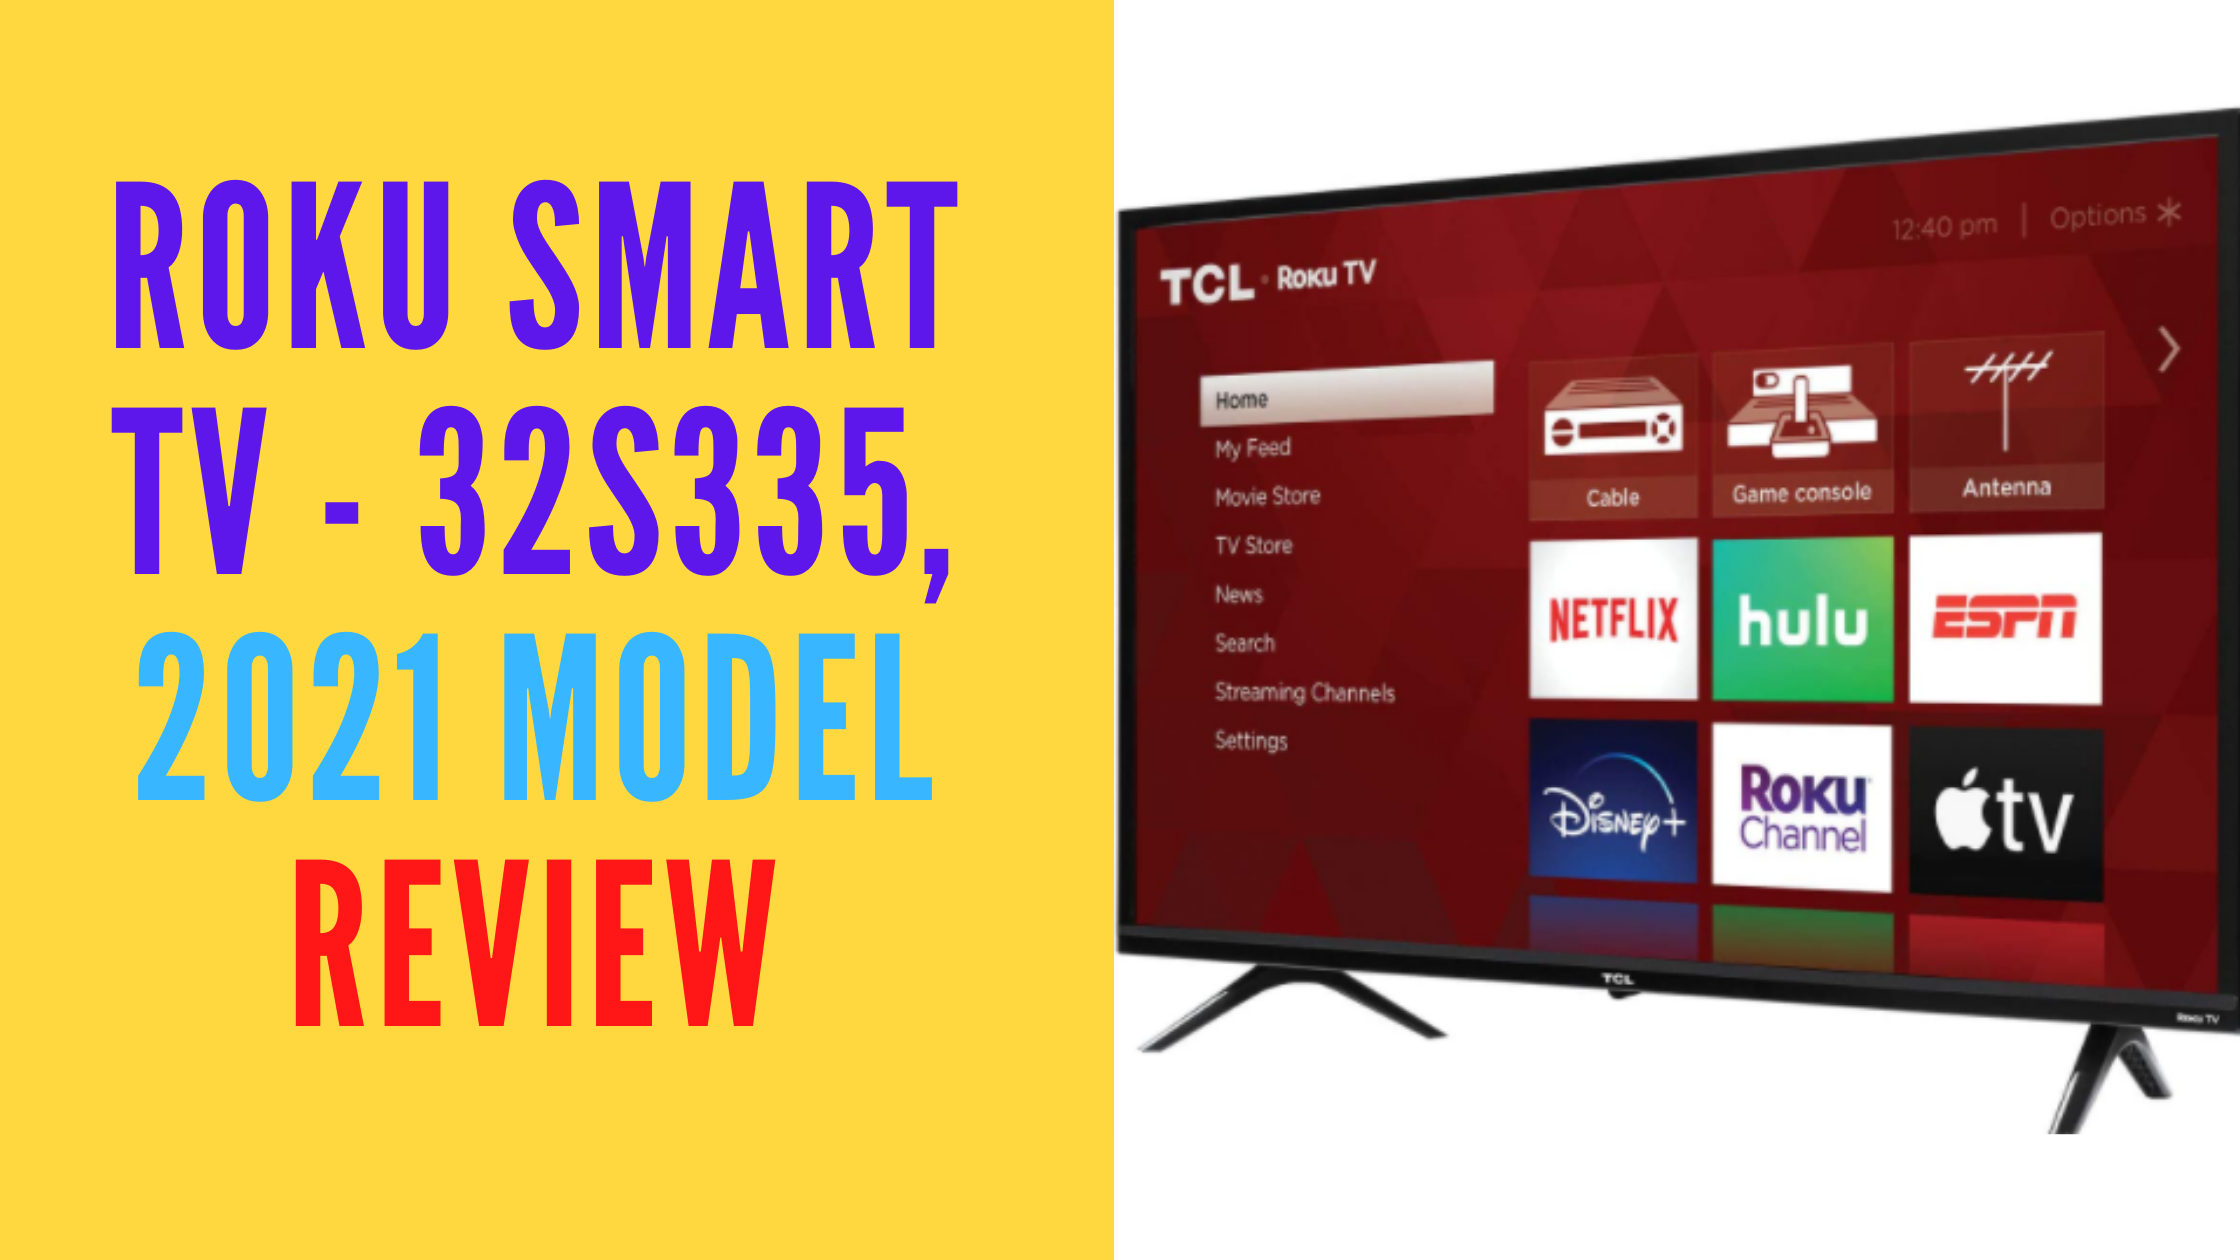 TCL 32-inch 3-Series 720p Roku Smart TV – 32S335, 2021 Model Review